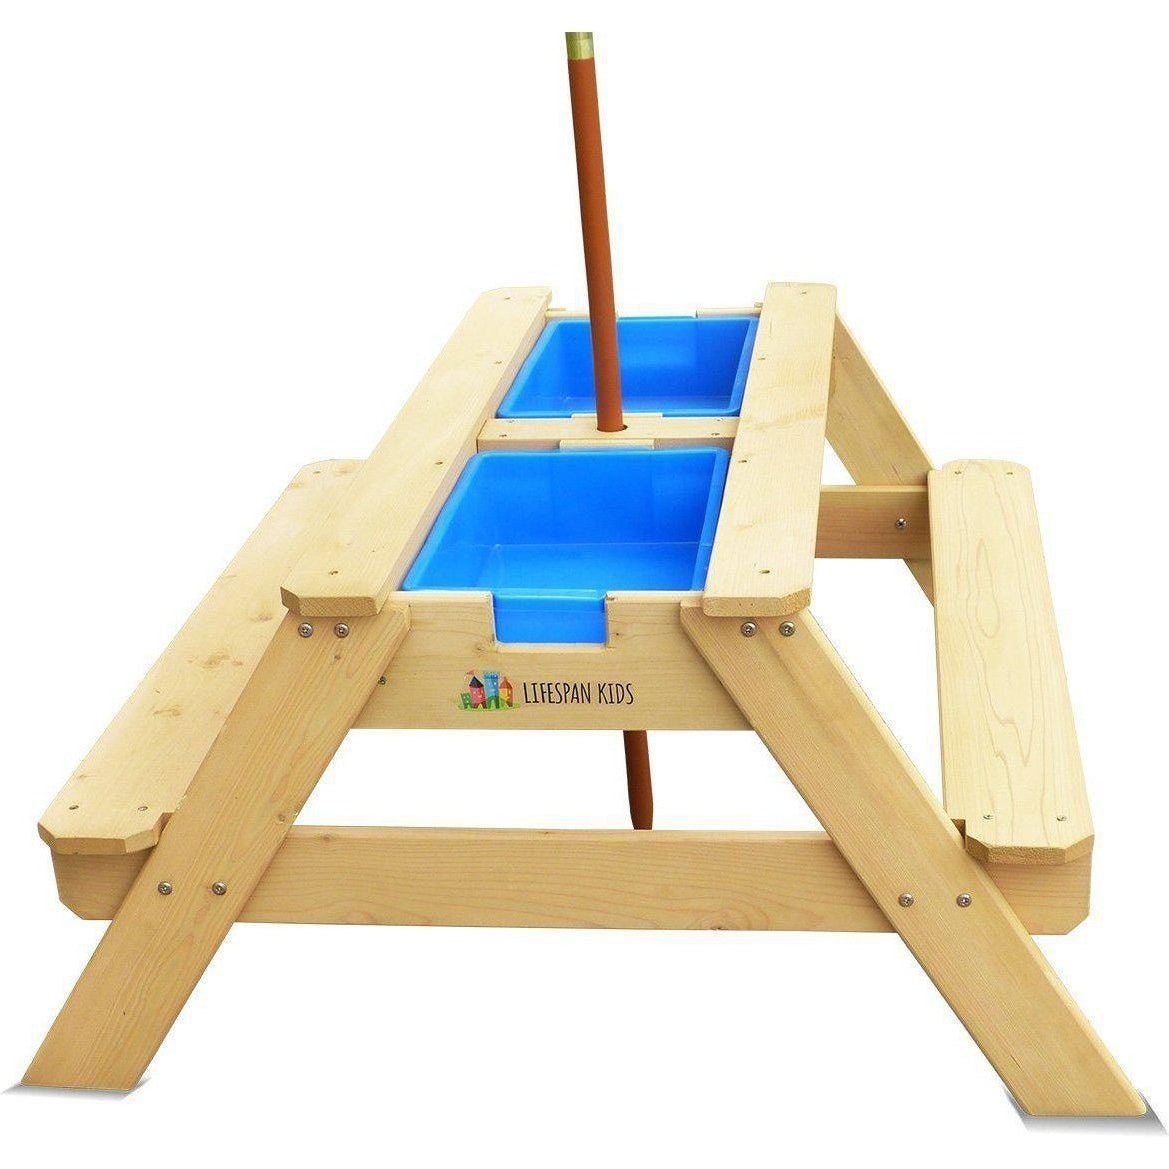 Kids Picnic Sand and Water Activity Table with Bench Seat Outdoor Toy